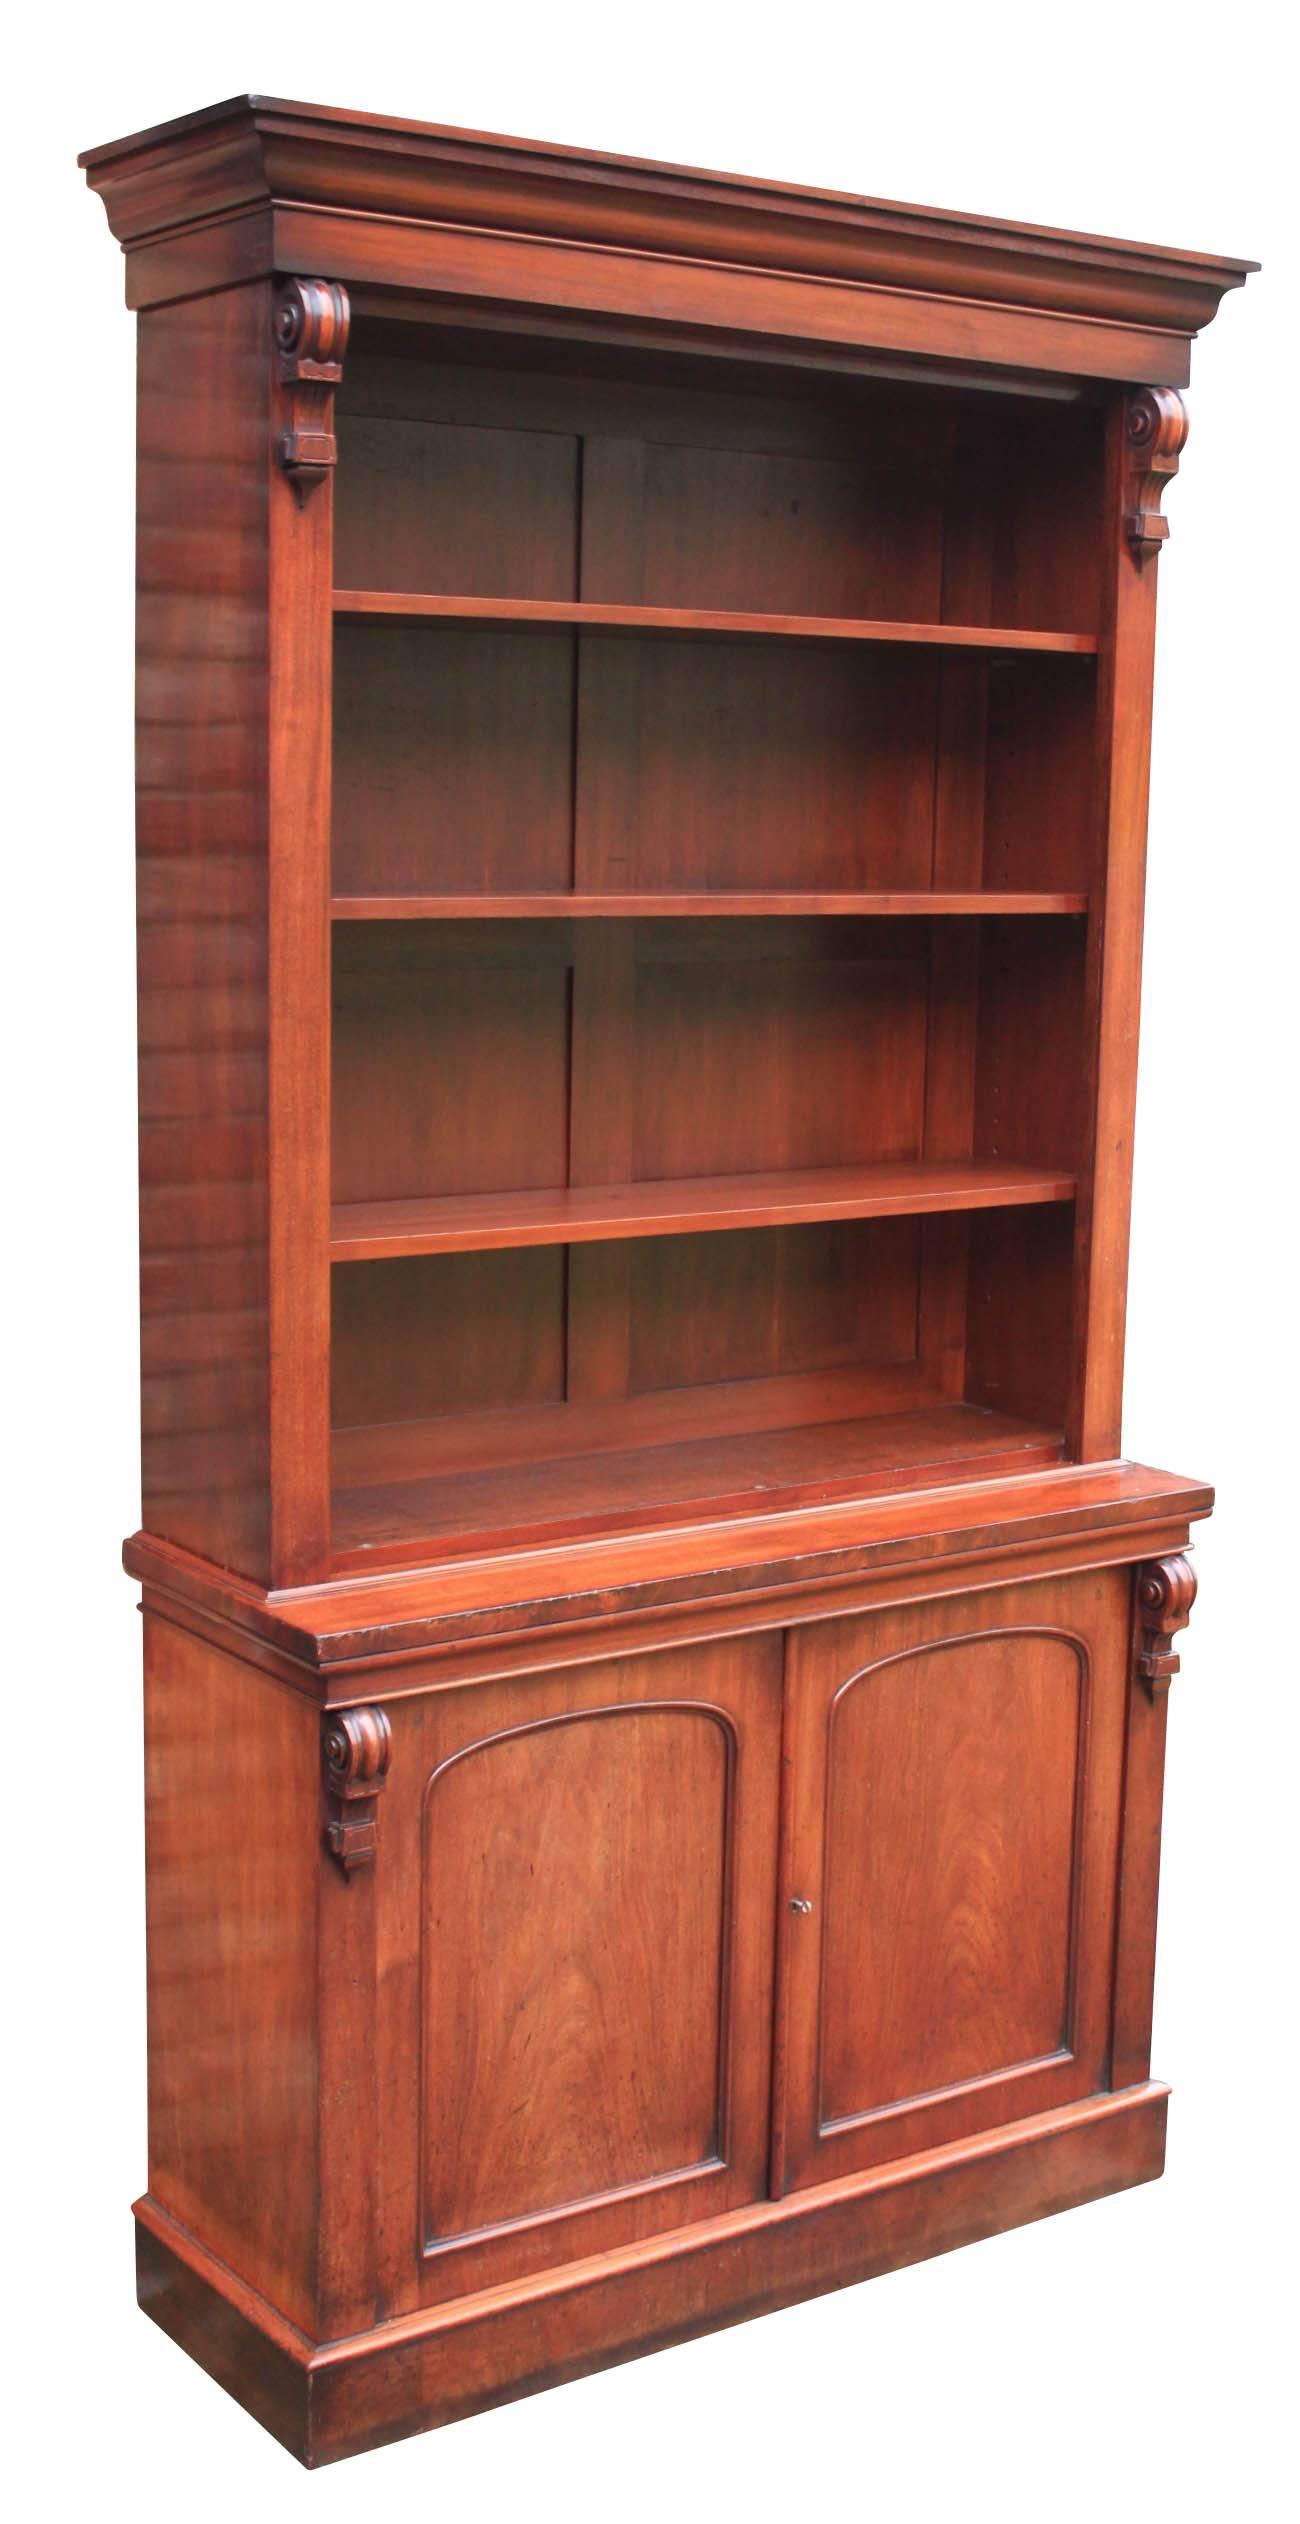 English, circa 1850.
A very tall solid bookcase in superb condition.
Cornice top over three adjustable shelves, with carved corbels either side.
The base has a cupboard with panelled doors which open to reveal a single removable shelf.
The doors